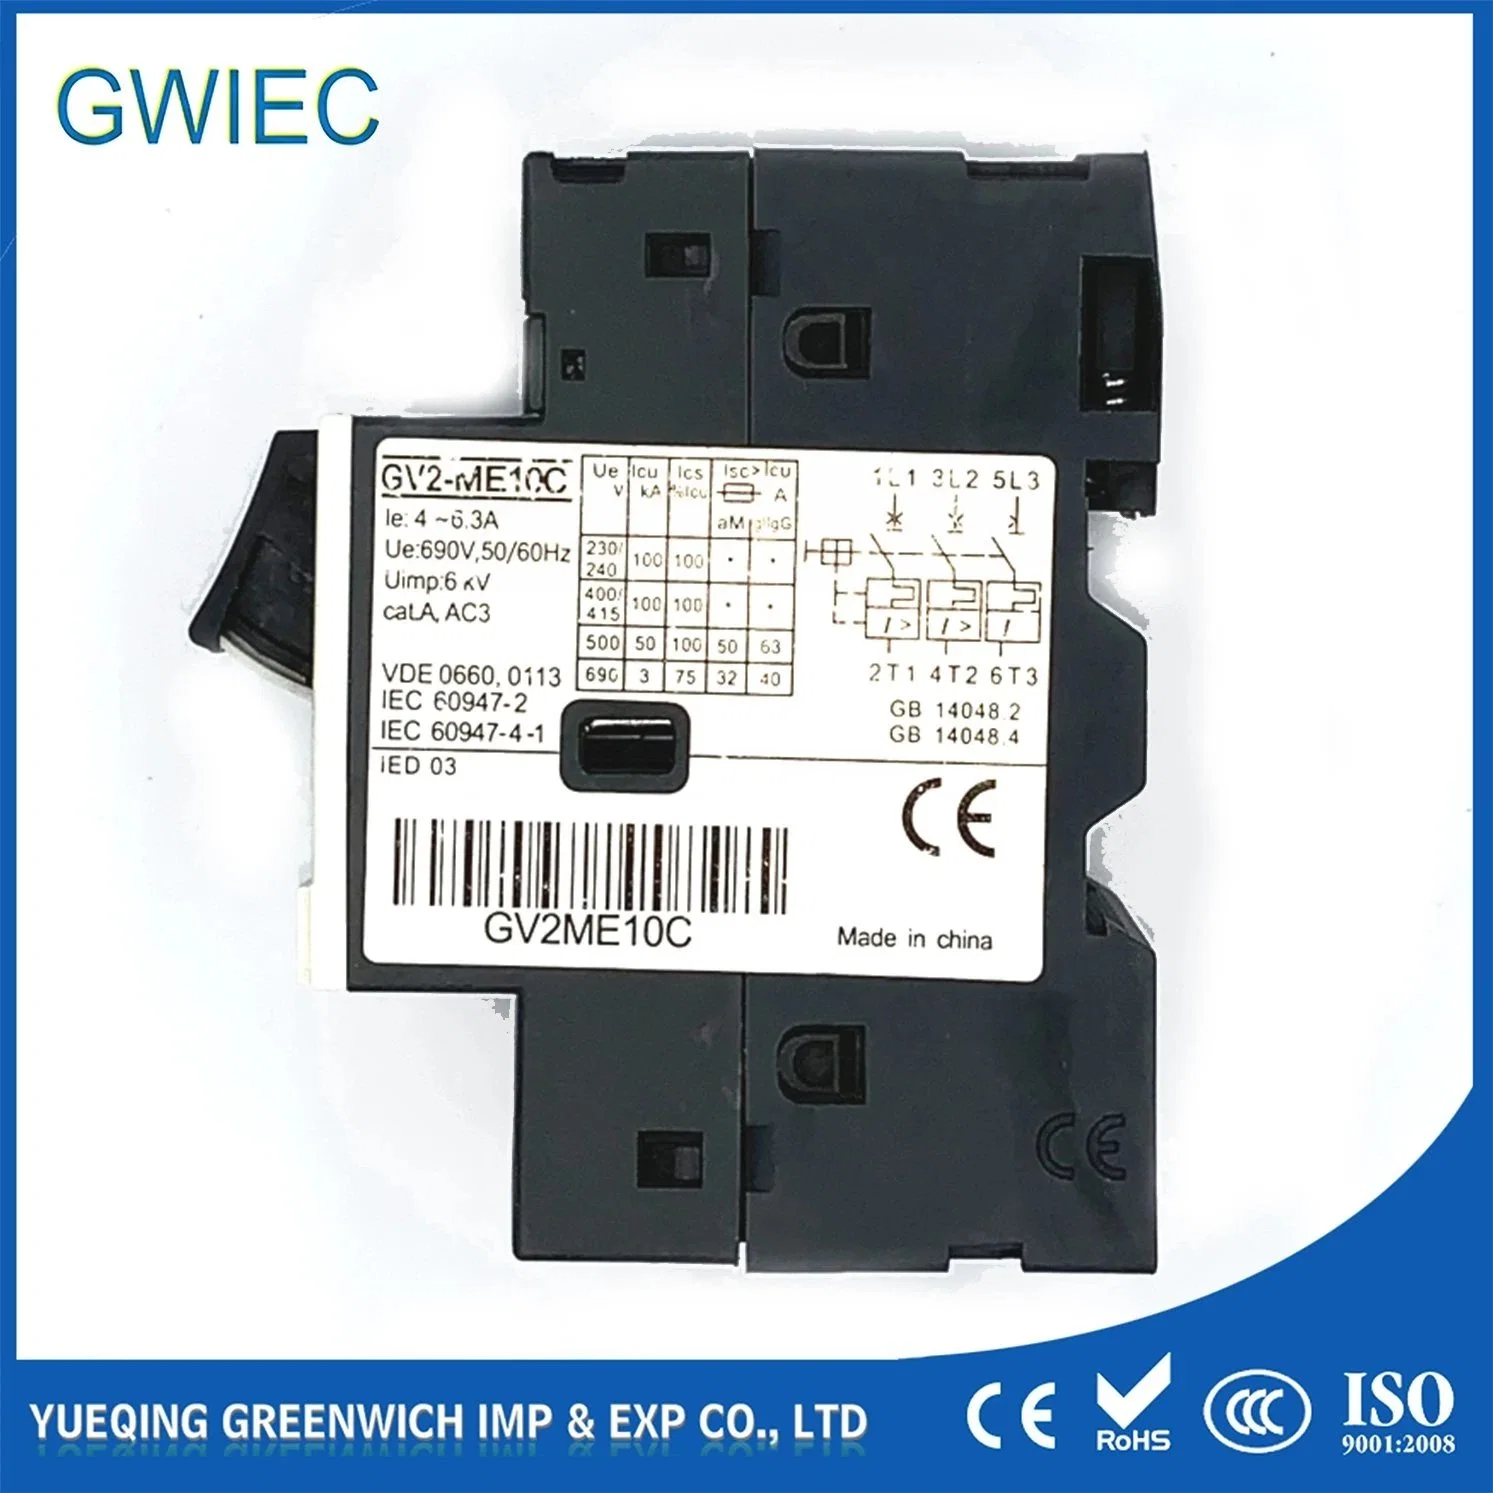 24.0-32.0 25.0-40.0 Overcurrent Protection Overload Breaker Motor Circuit Protector with Good Price